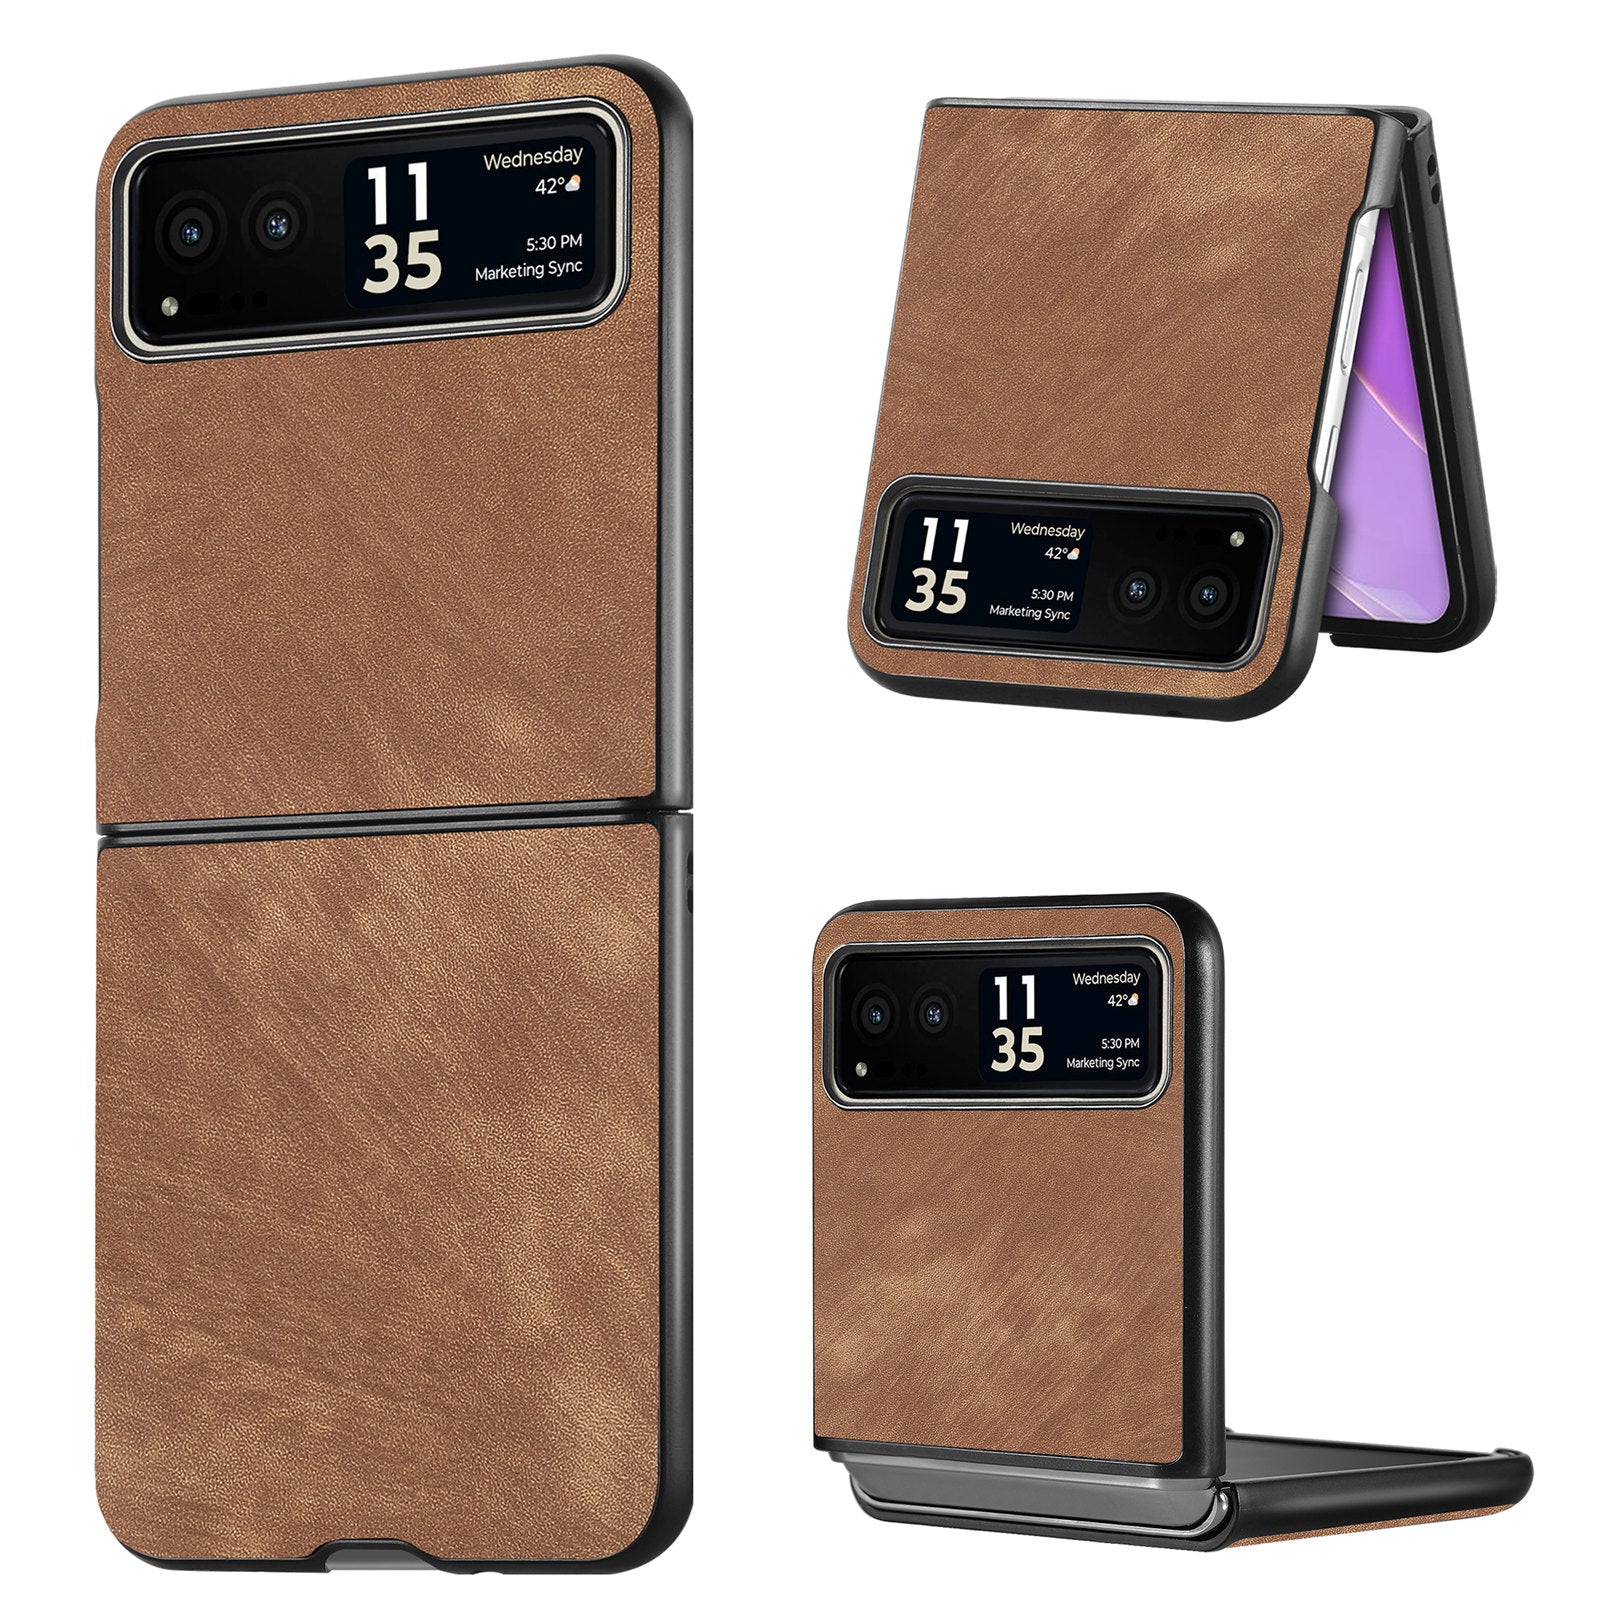 Uniqkart for Motorola Razr 40 5G Phone Case PU Leather Coated PC Case Skin-Touch Protective Cover - Brown